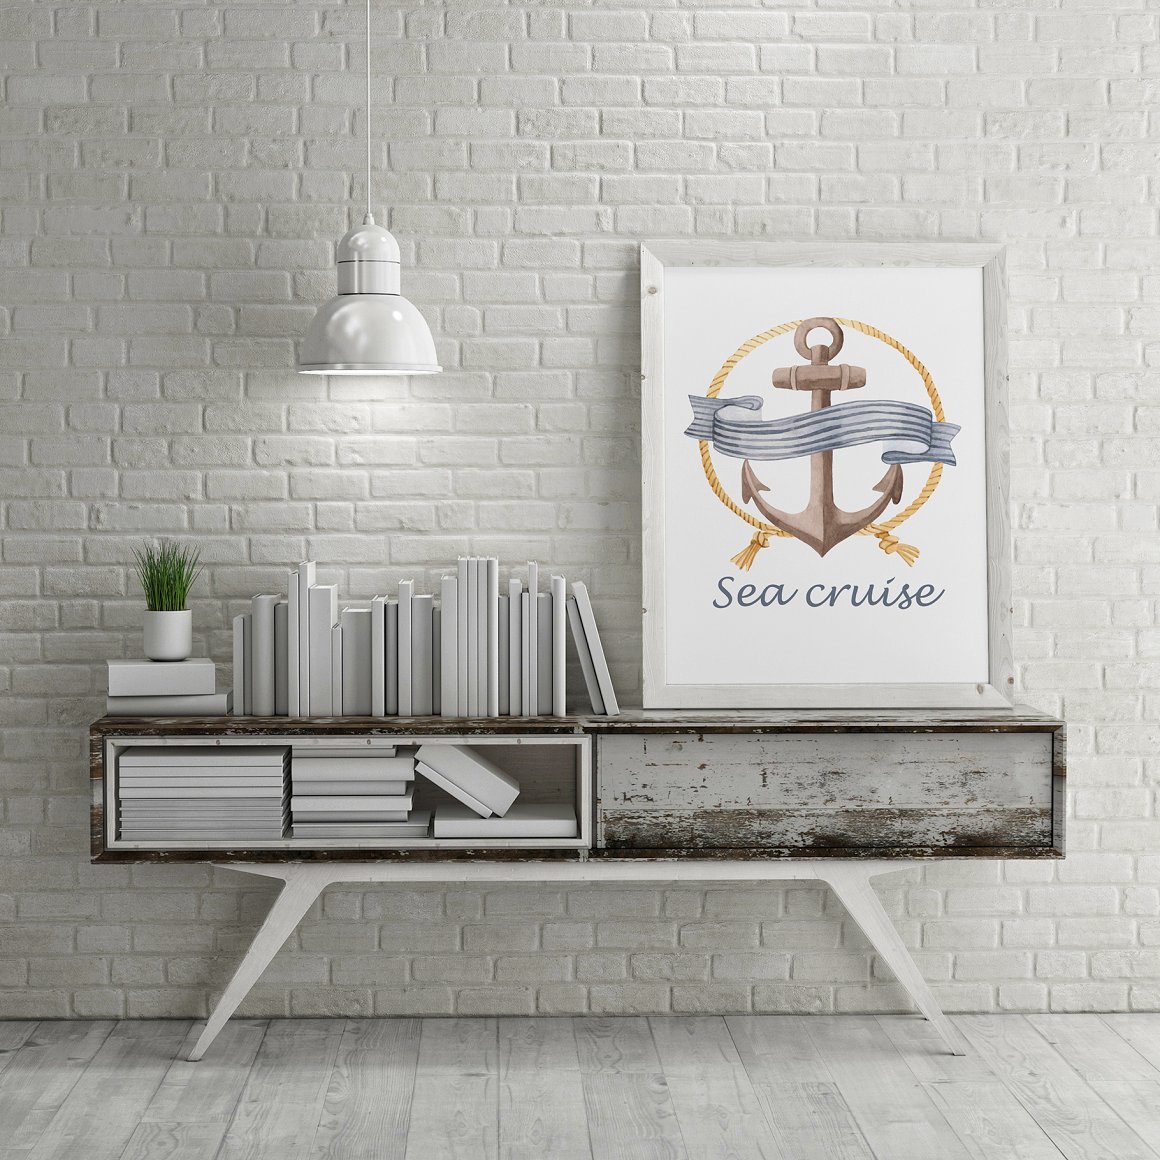 An image of a bedside table and a painting with an anchor.